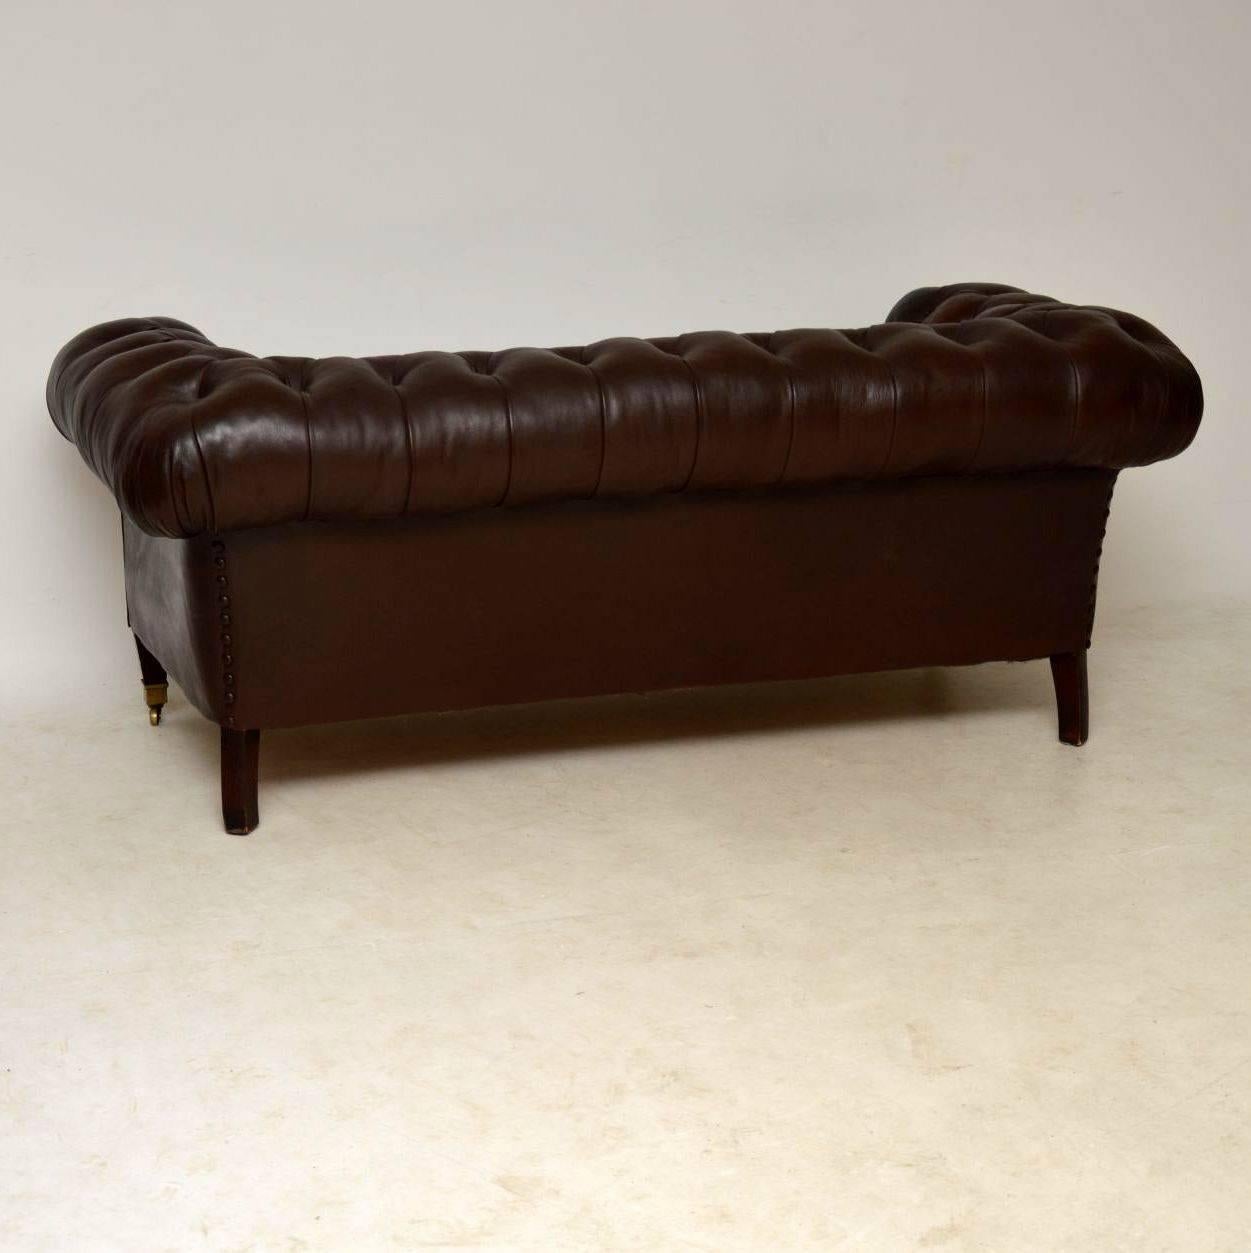 Early 20th Century Antique Swedish Leather Chesterfield Sofa